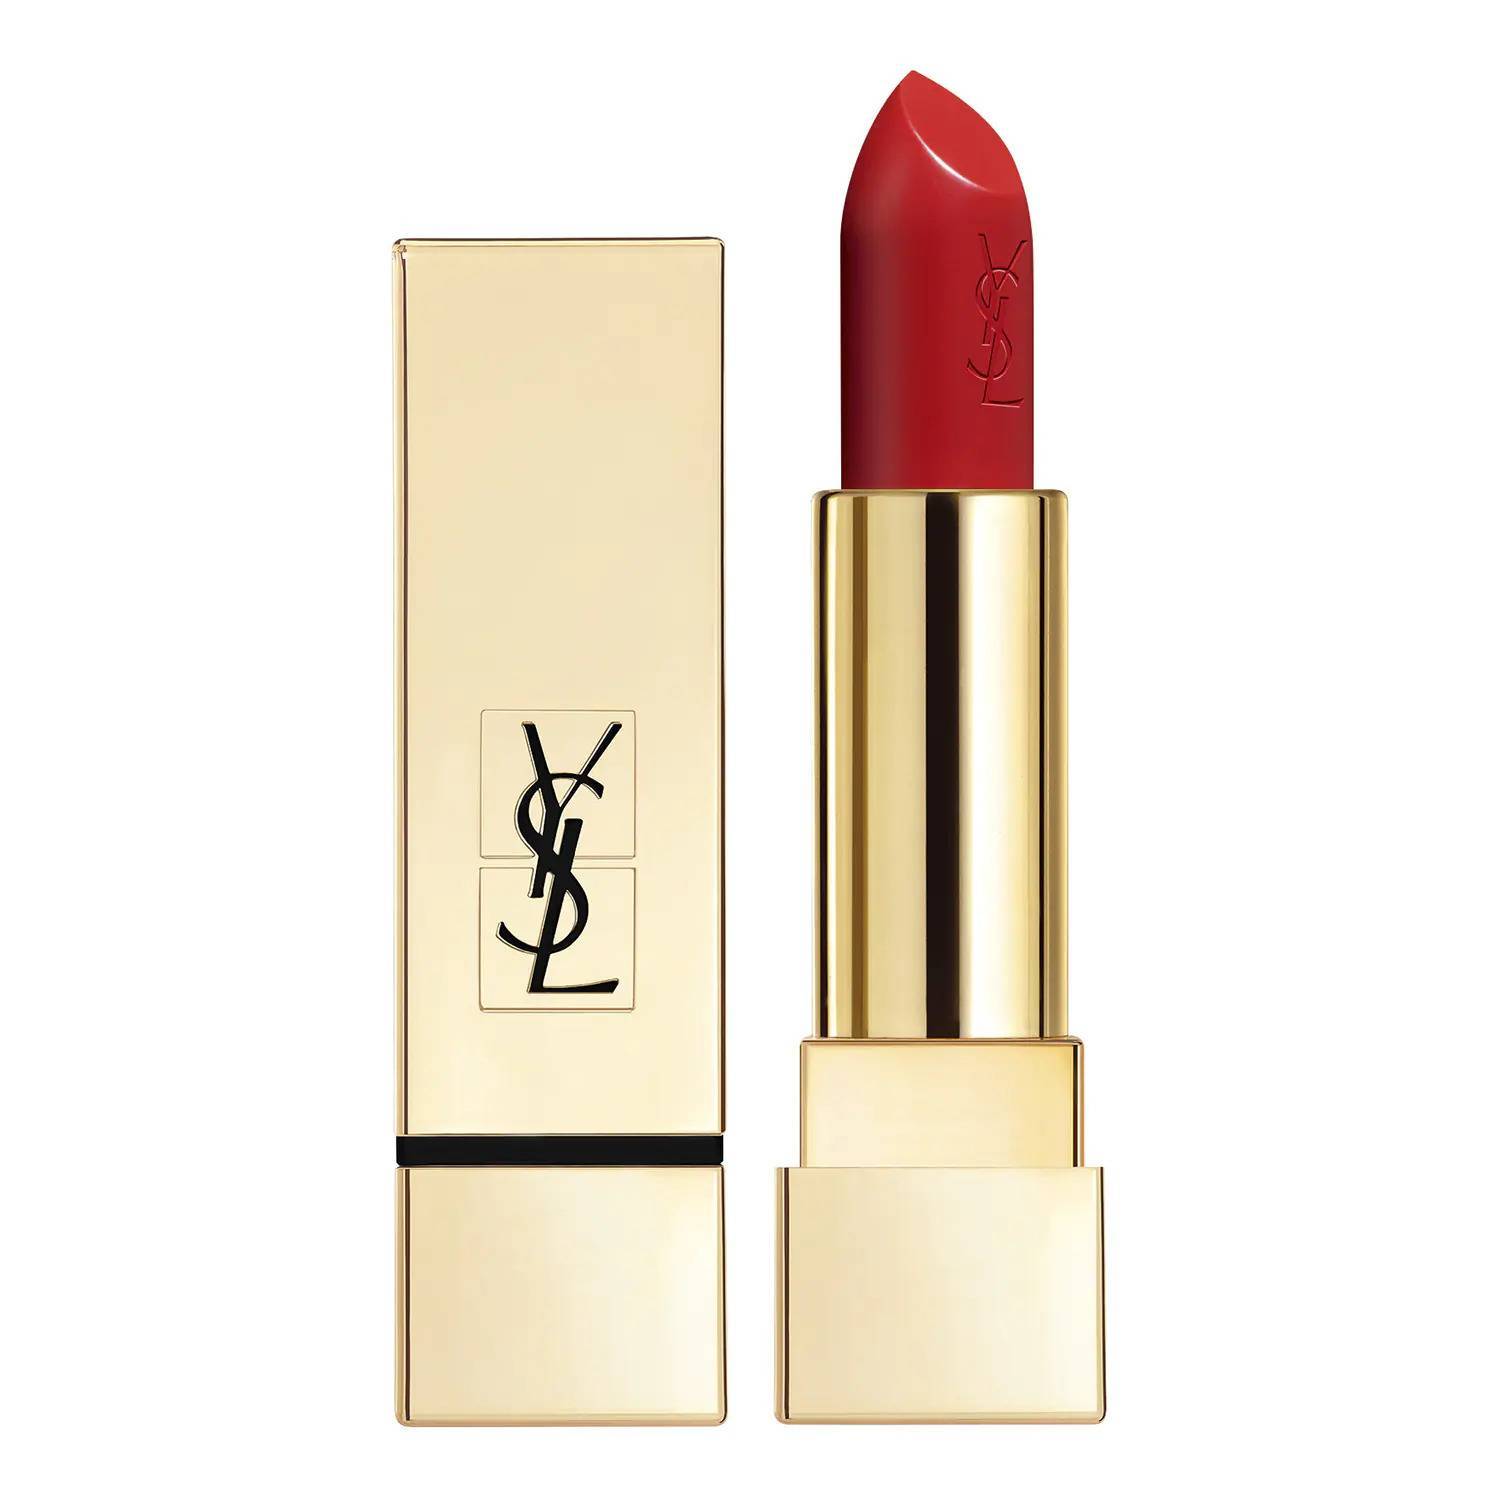 Pomadka ROUGE PUR COUTURE YSL (Fot. materiały prasowe)